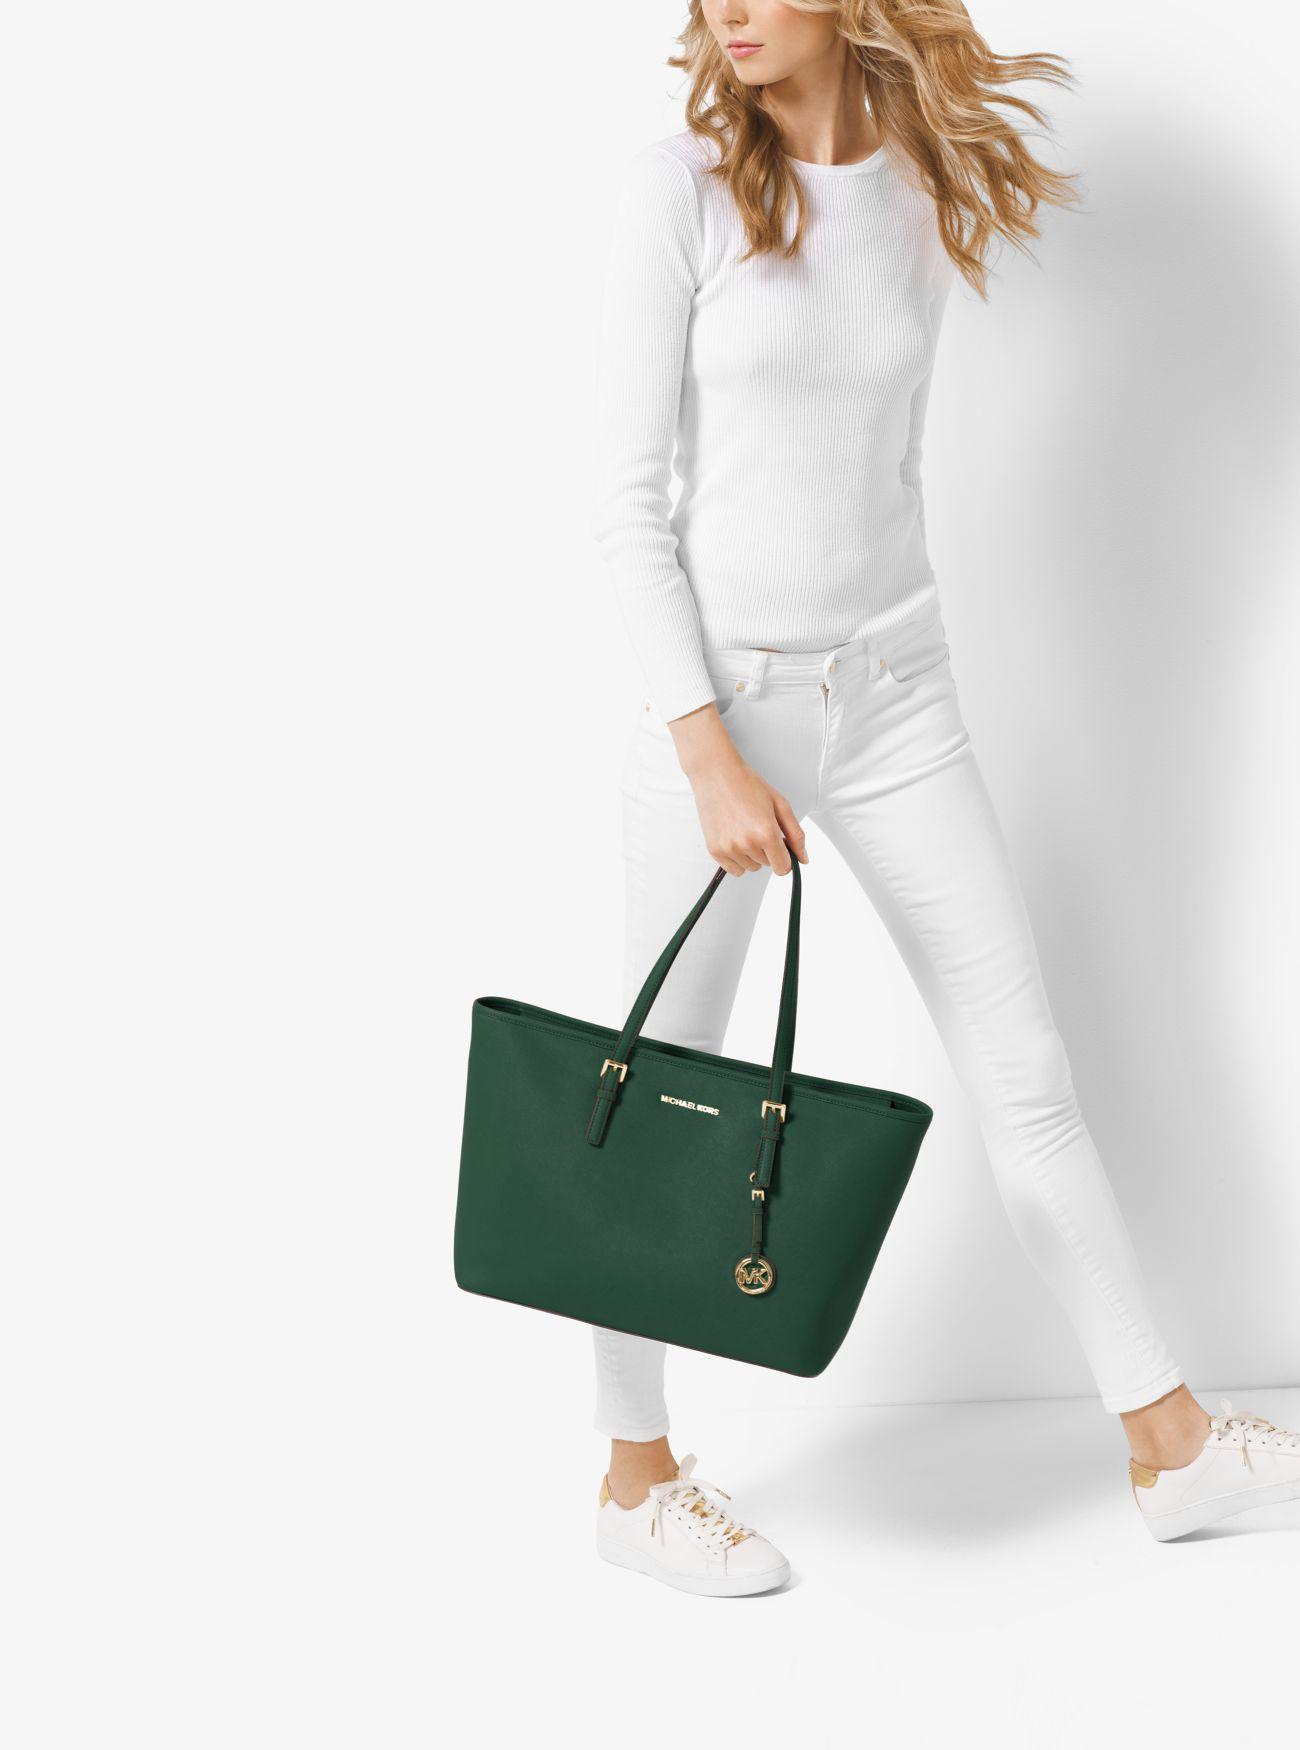 Michael Kors Jet Set Travel Large Saffiano Leather Top-zip Tote in Moss  (Green) | Lyst UK